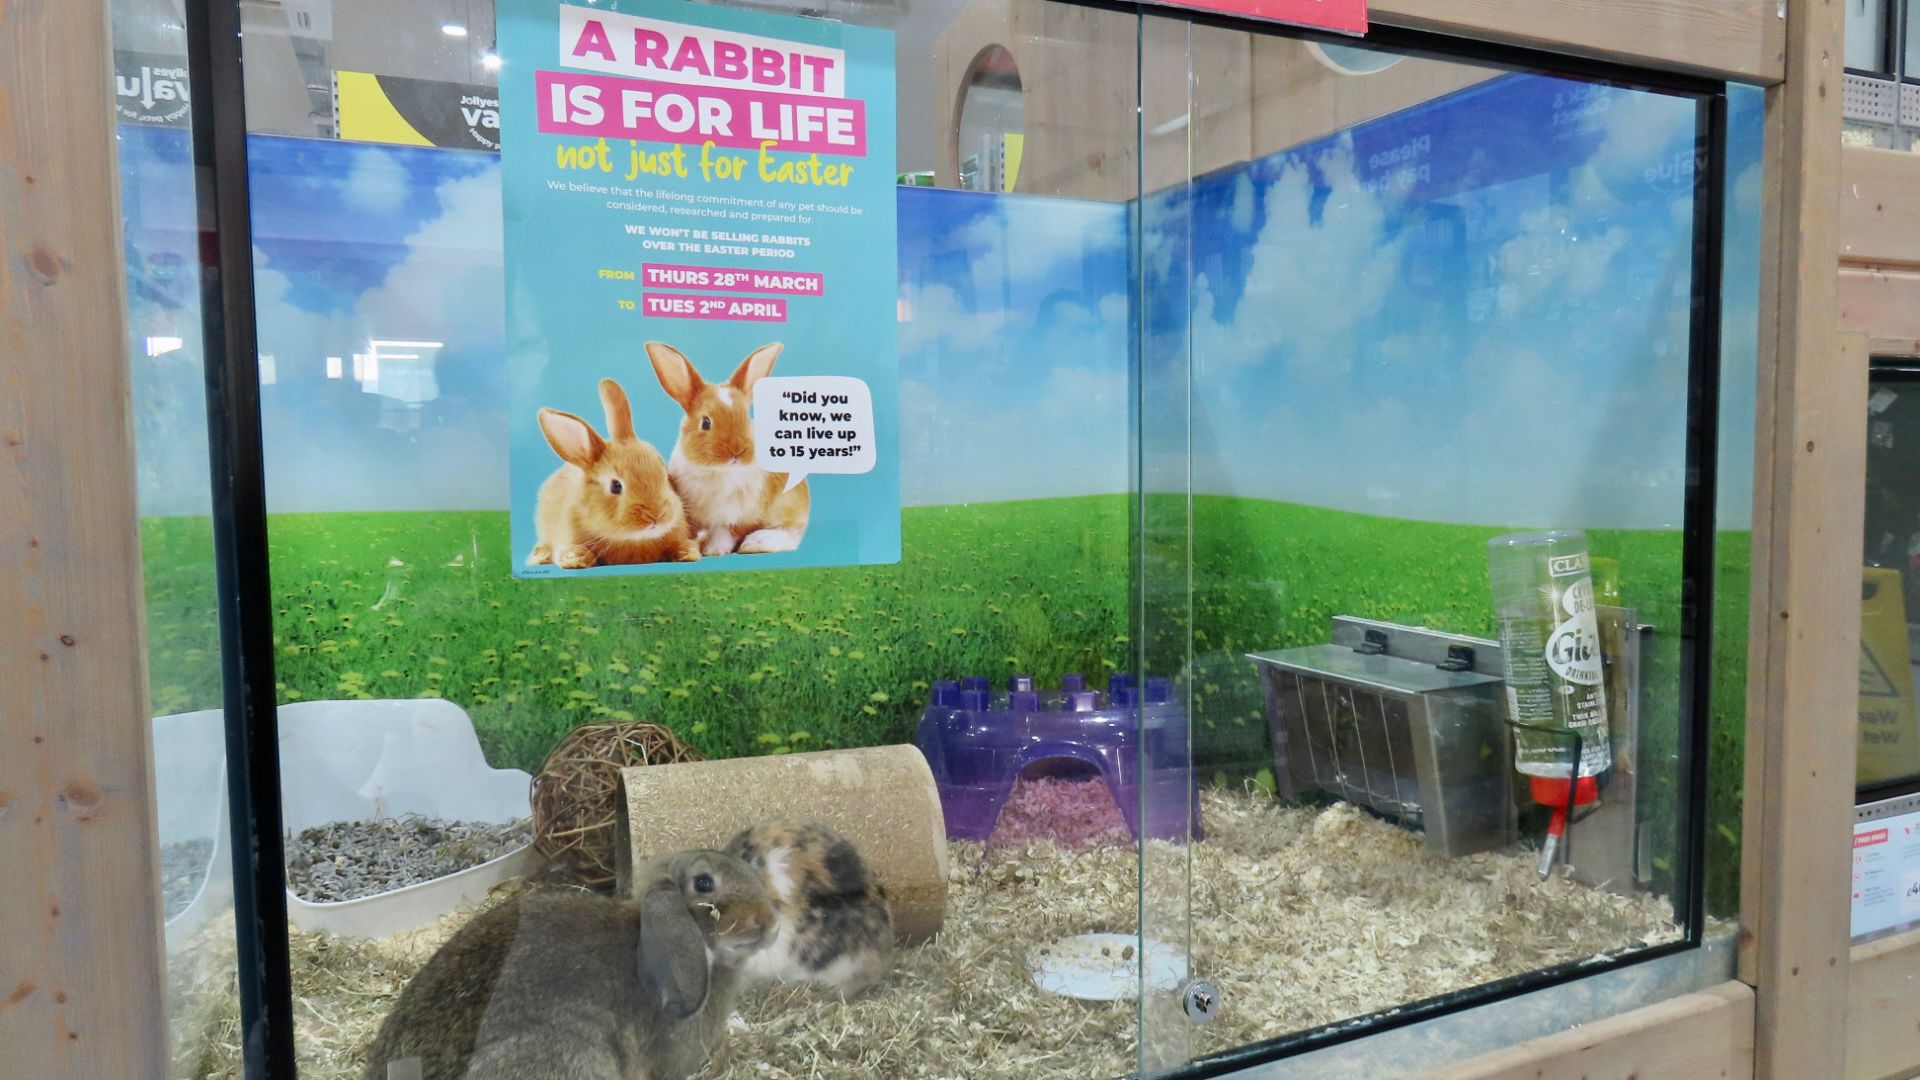 Rabbits at Jollyes - The Pet People at Kew Retail Park in Southport. Photo by Andrew Brown Arena PR